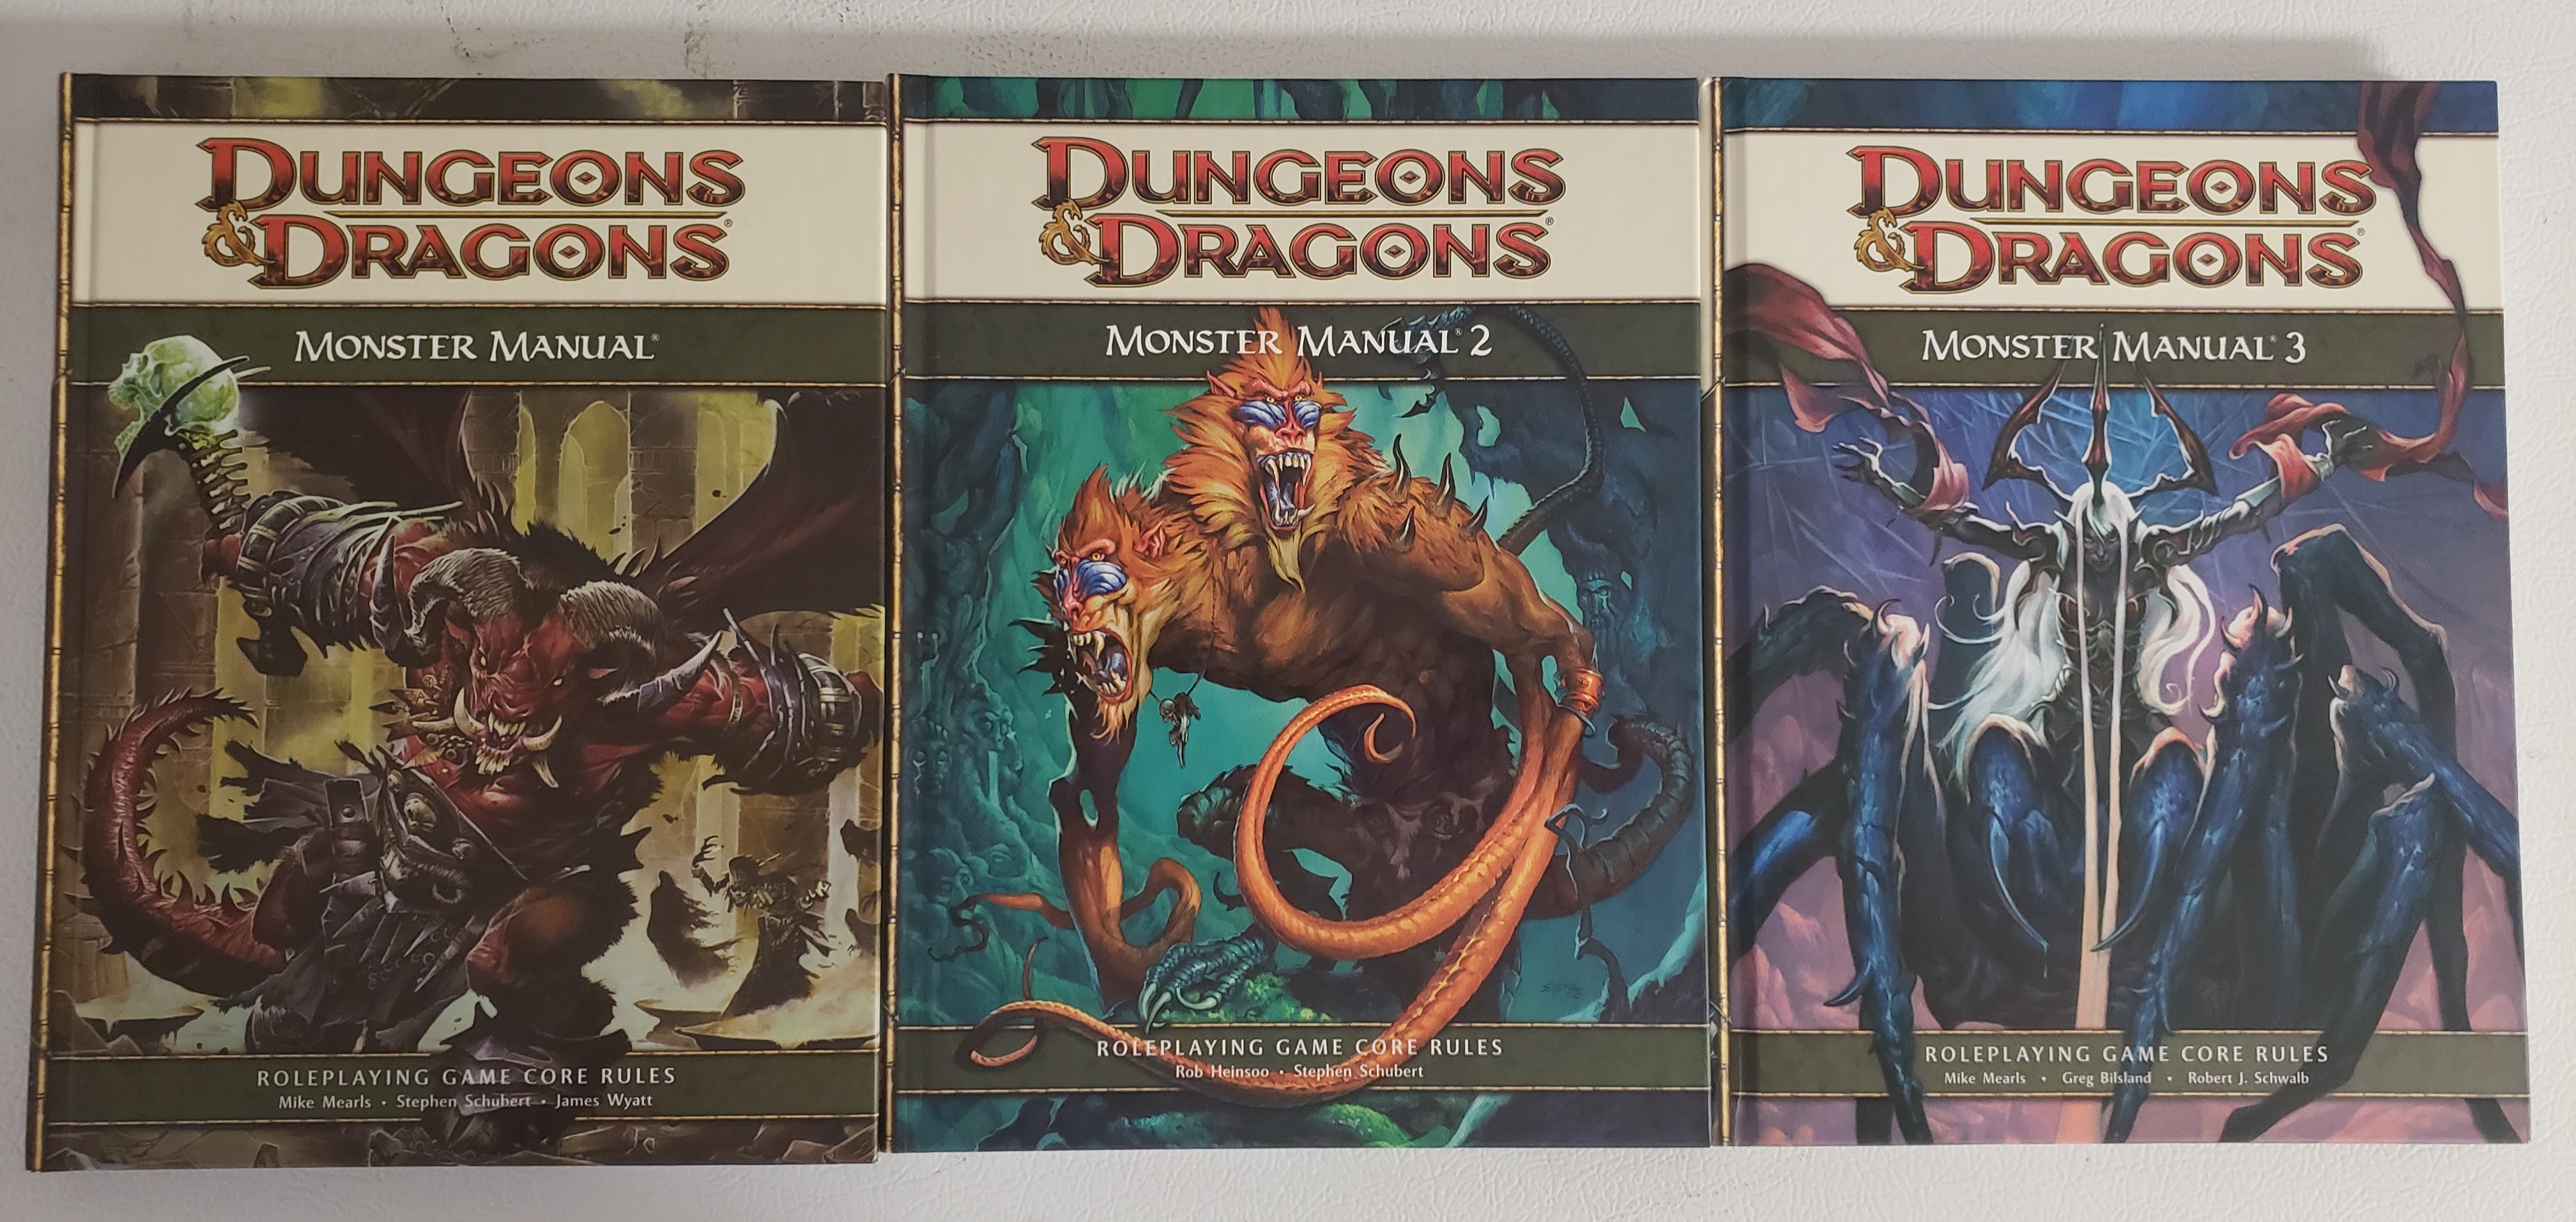 Telégrafo excusa Arriesgado The Other Side blog: Monstrous Mondays: The D&D 4th Ed Monster Manual  (Overview & Review)